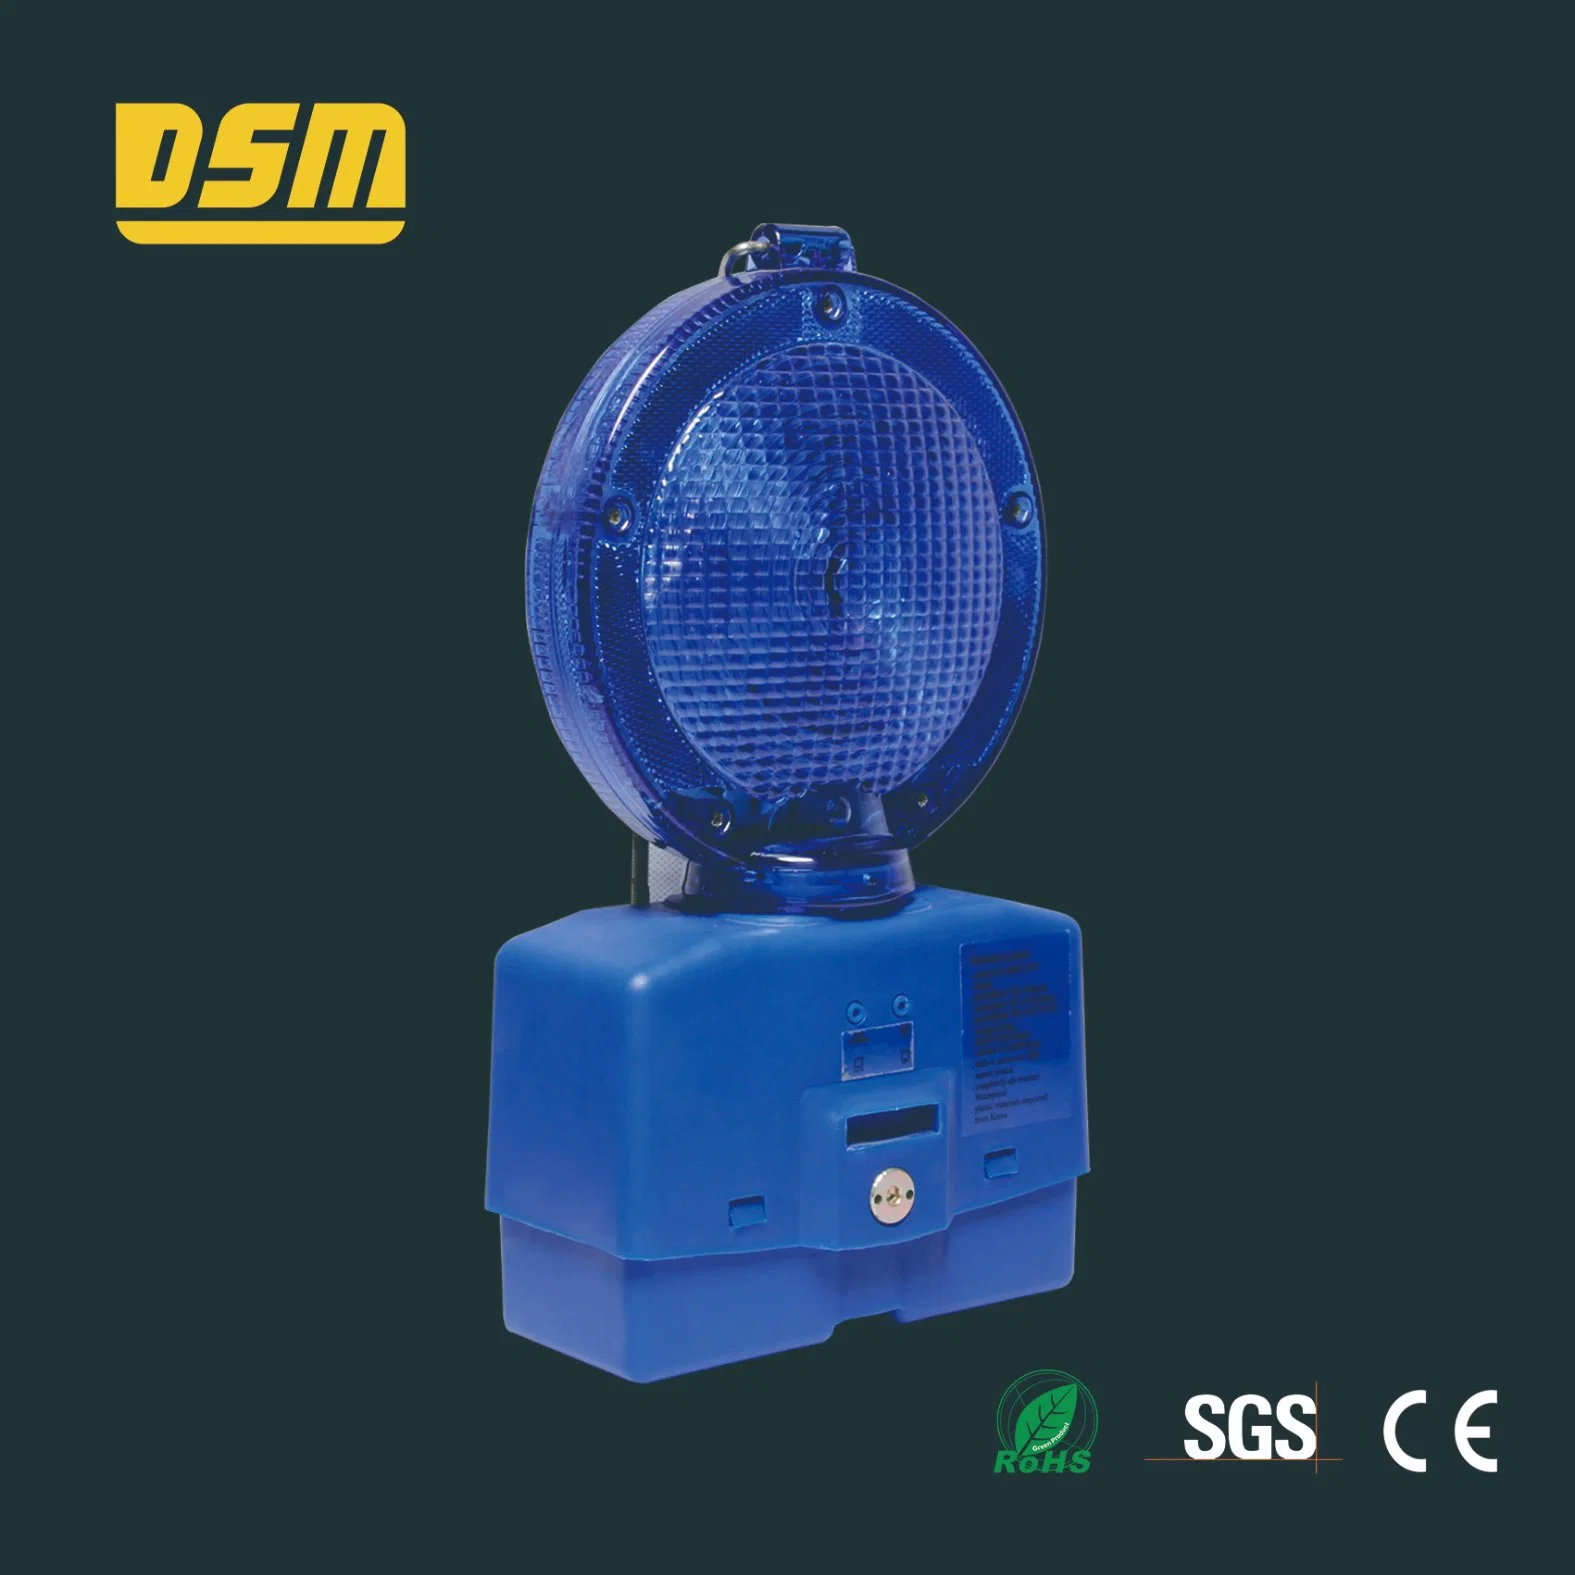 High quality/High cost performance RoHS Approved Southeast Asia Dsm Shockproof Anti-Rain Traffic Warning Lamp Control Barricade Light